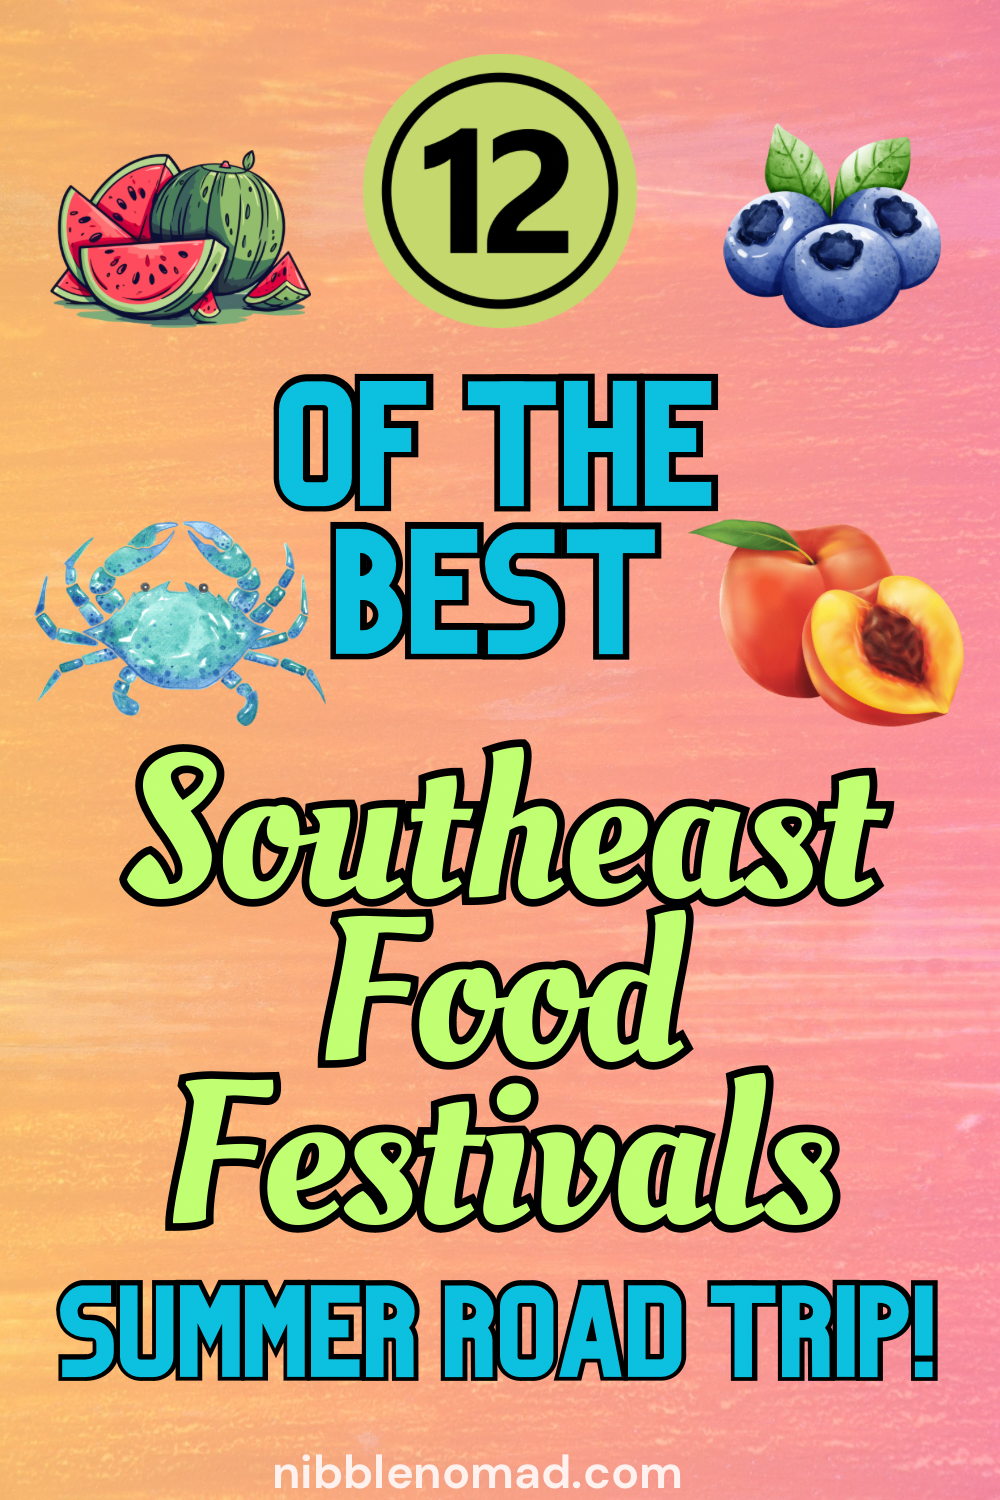 The best food festivals in the Southeast